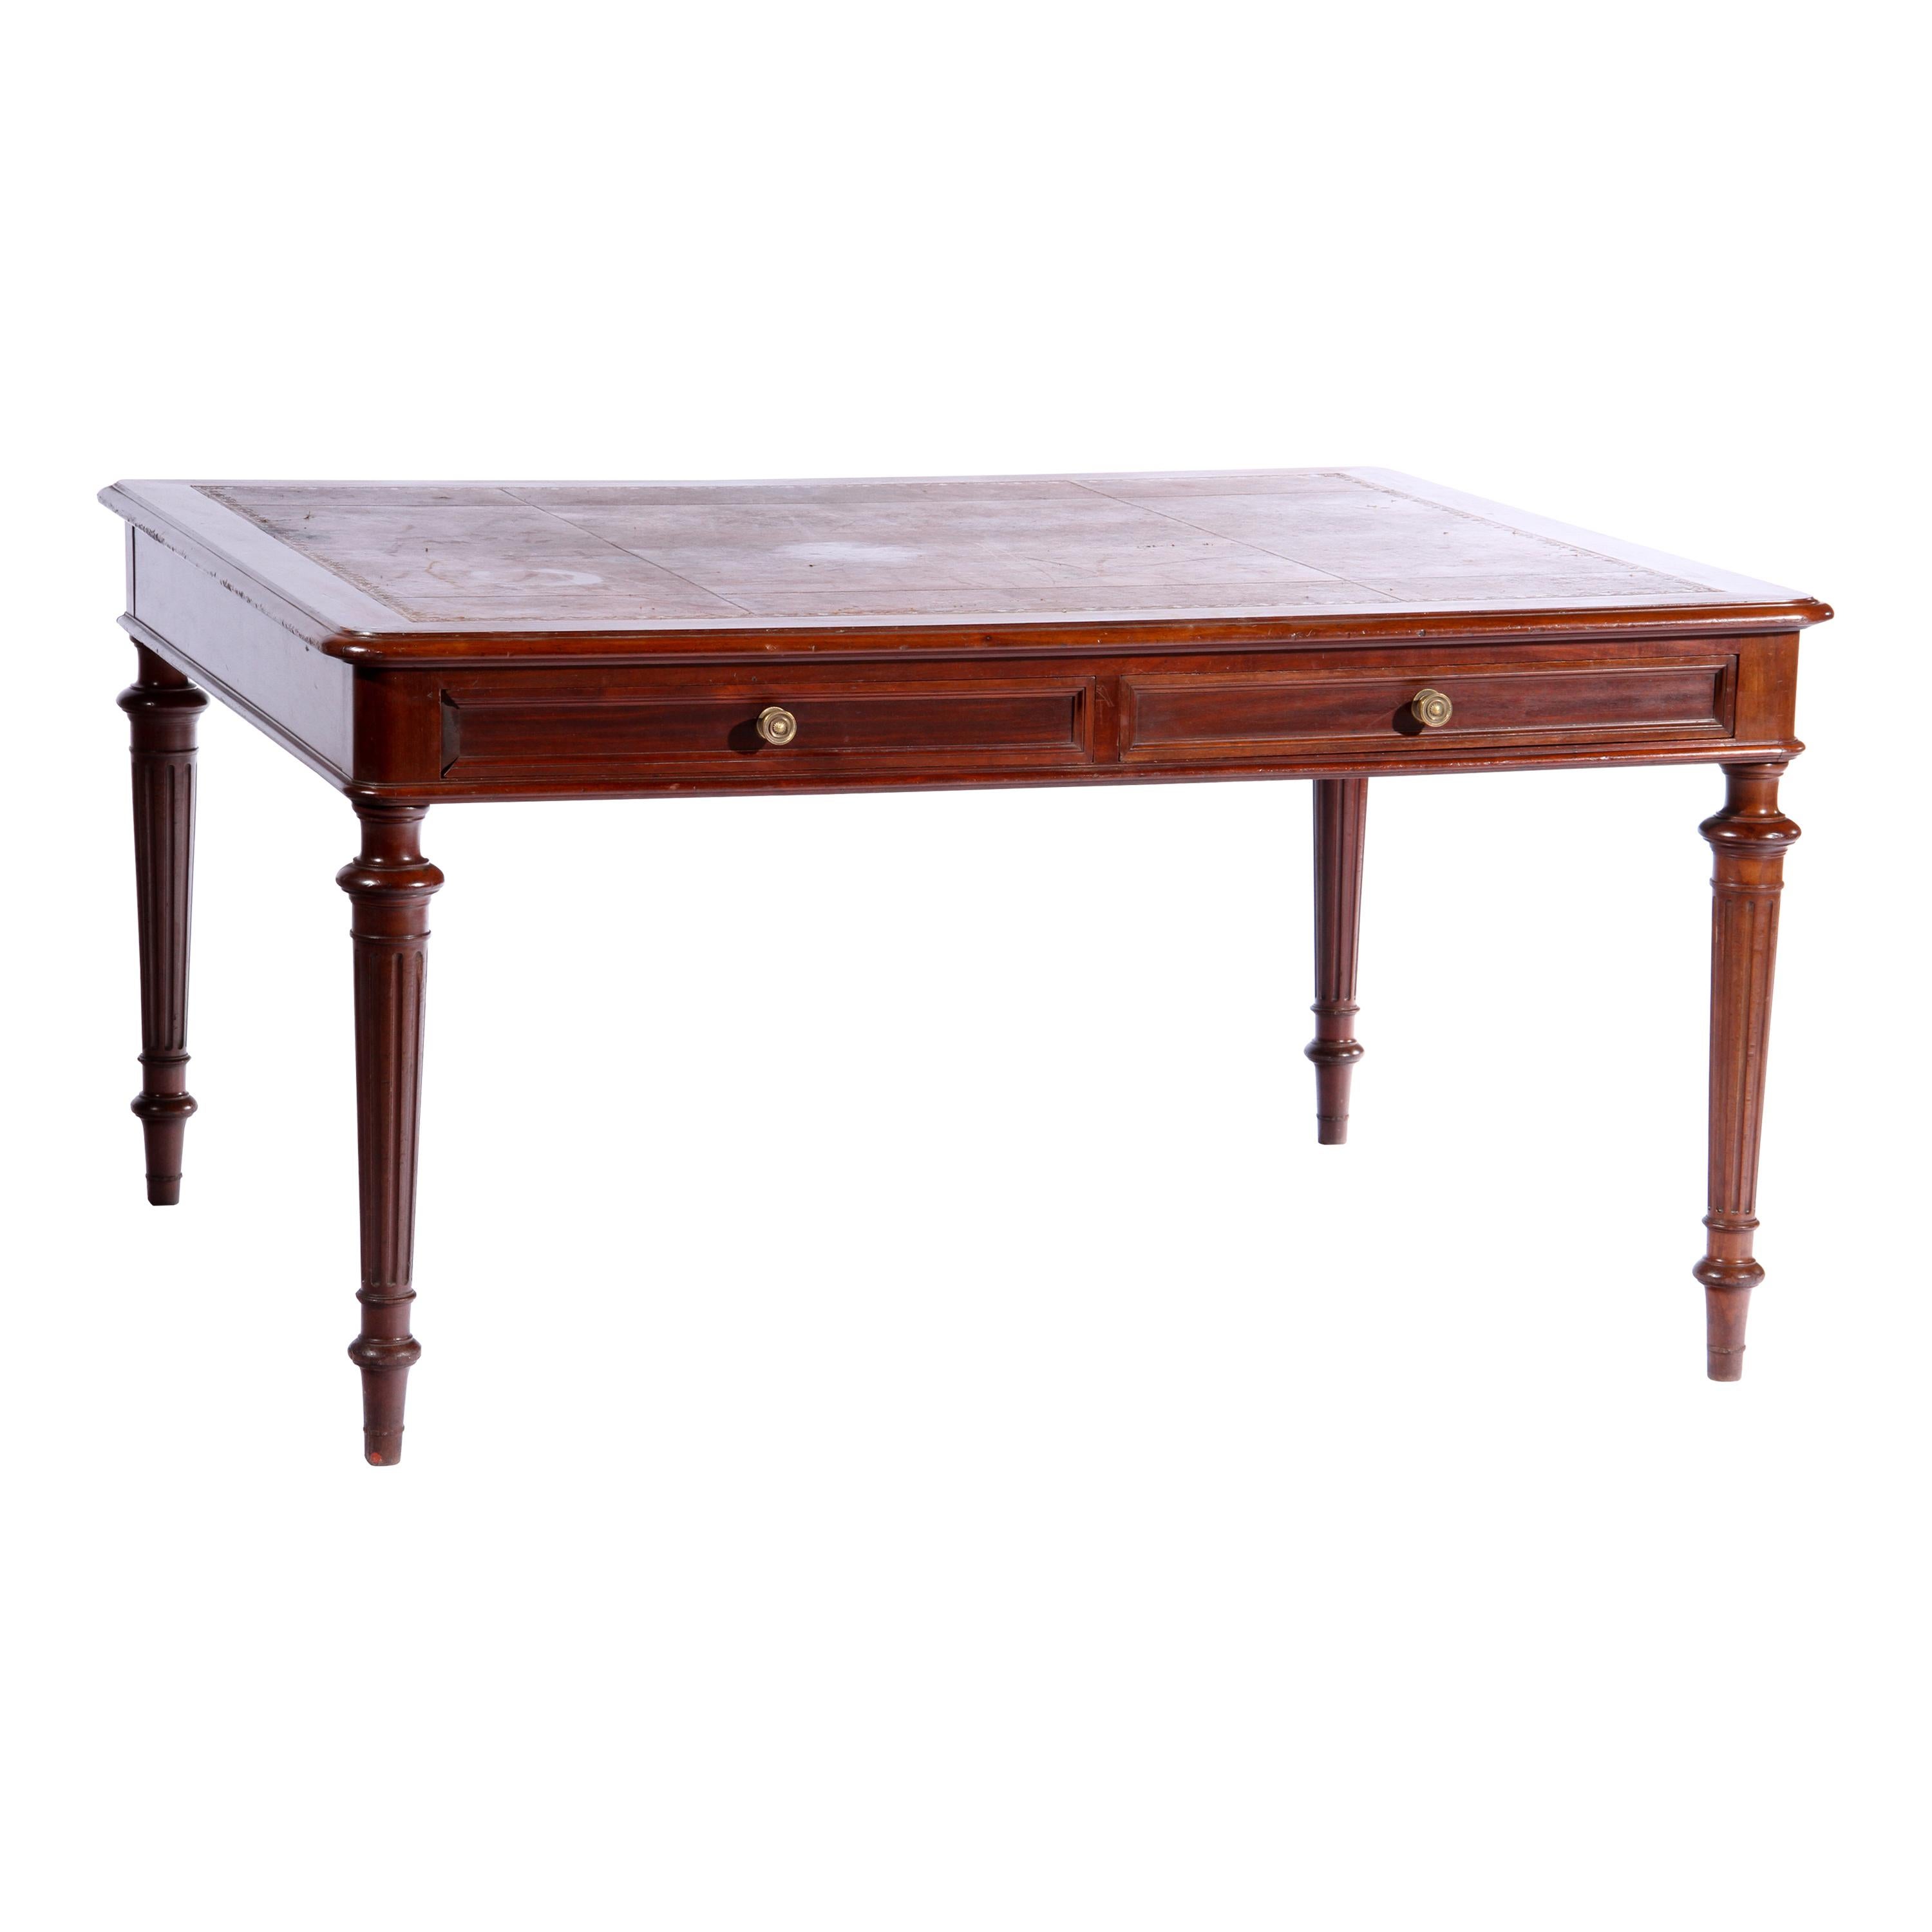 Late 19th century mahogany partners writing table, with leather inset.